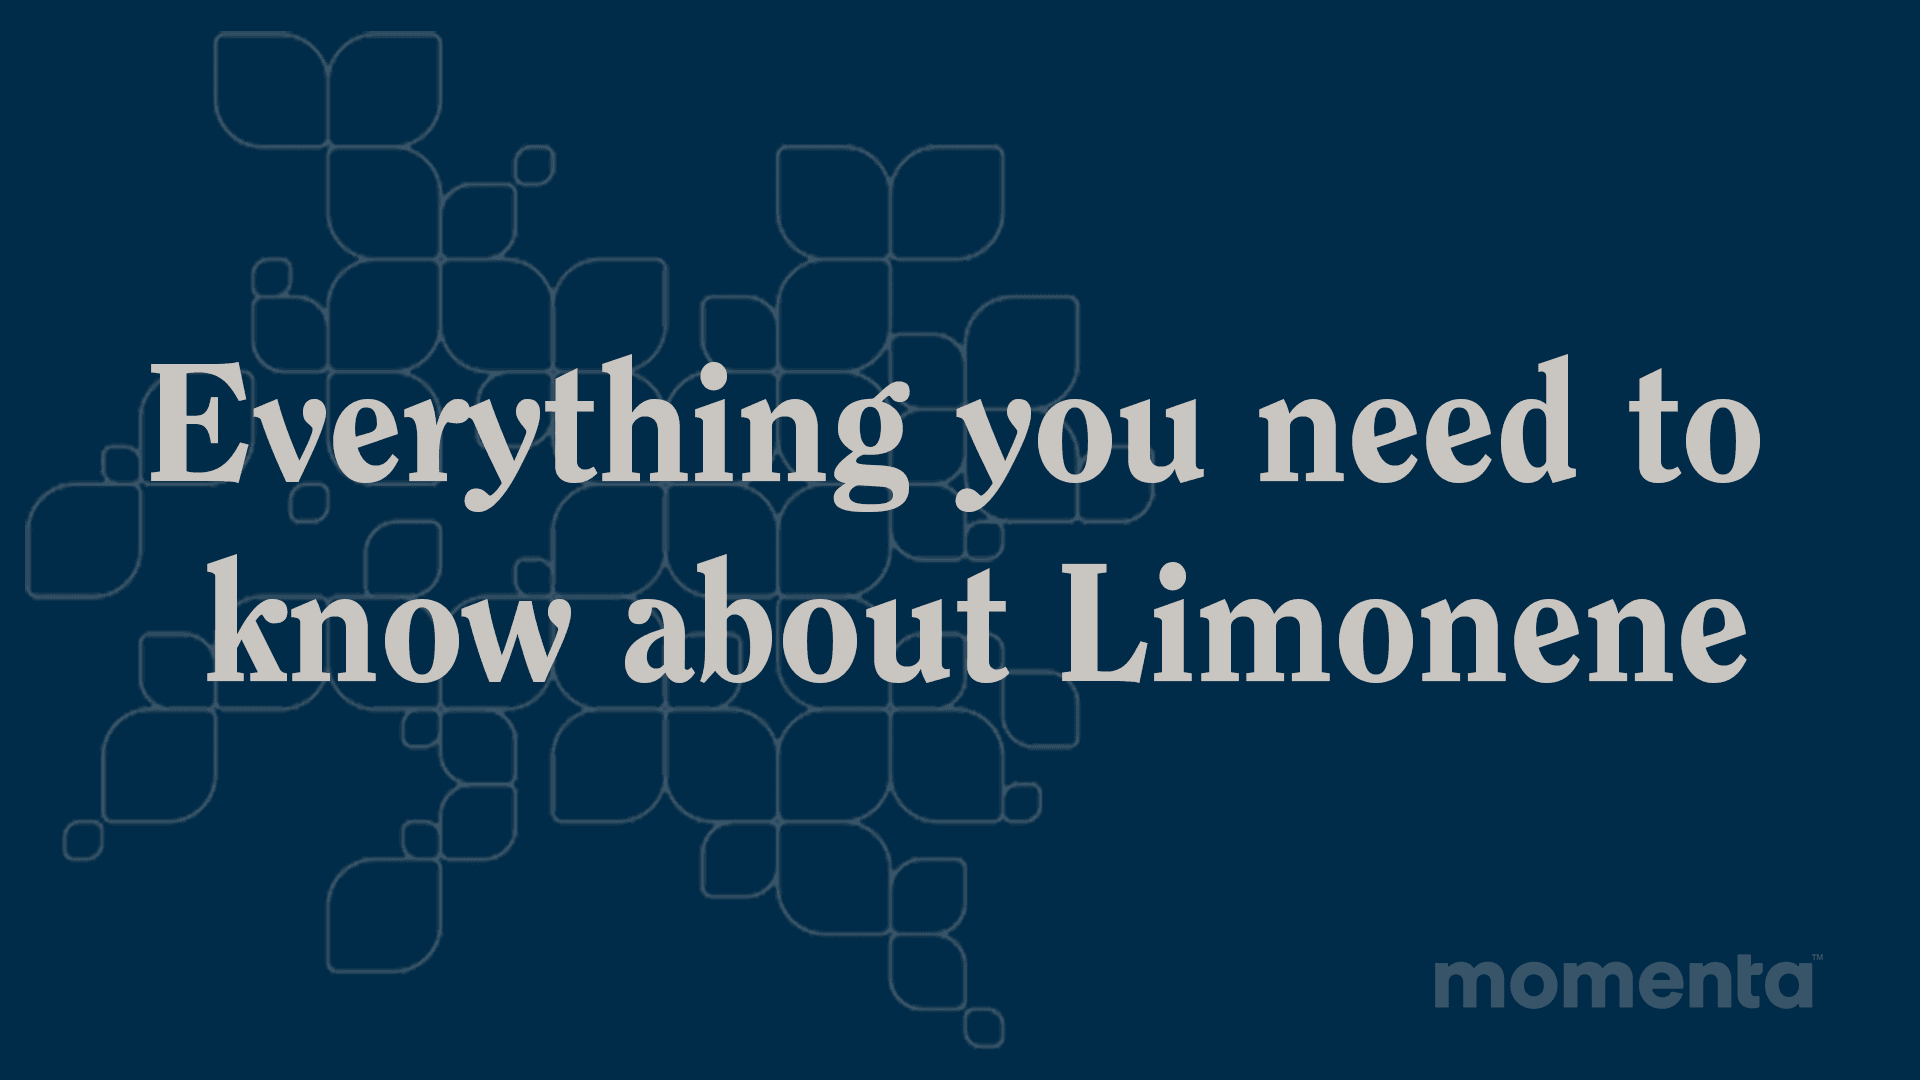 Everything you need to know about Limonene